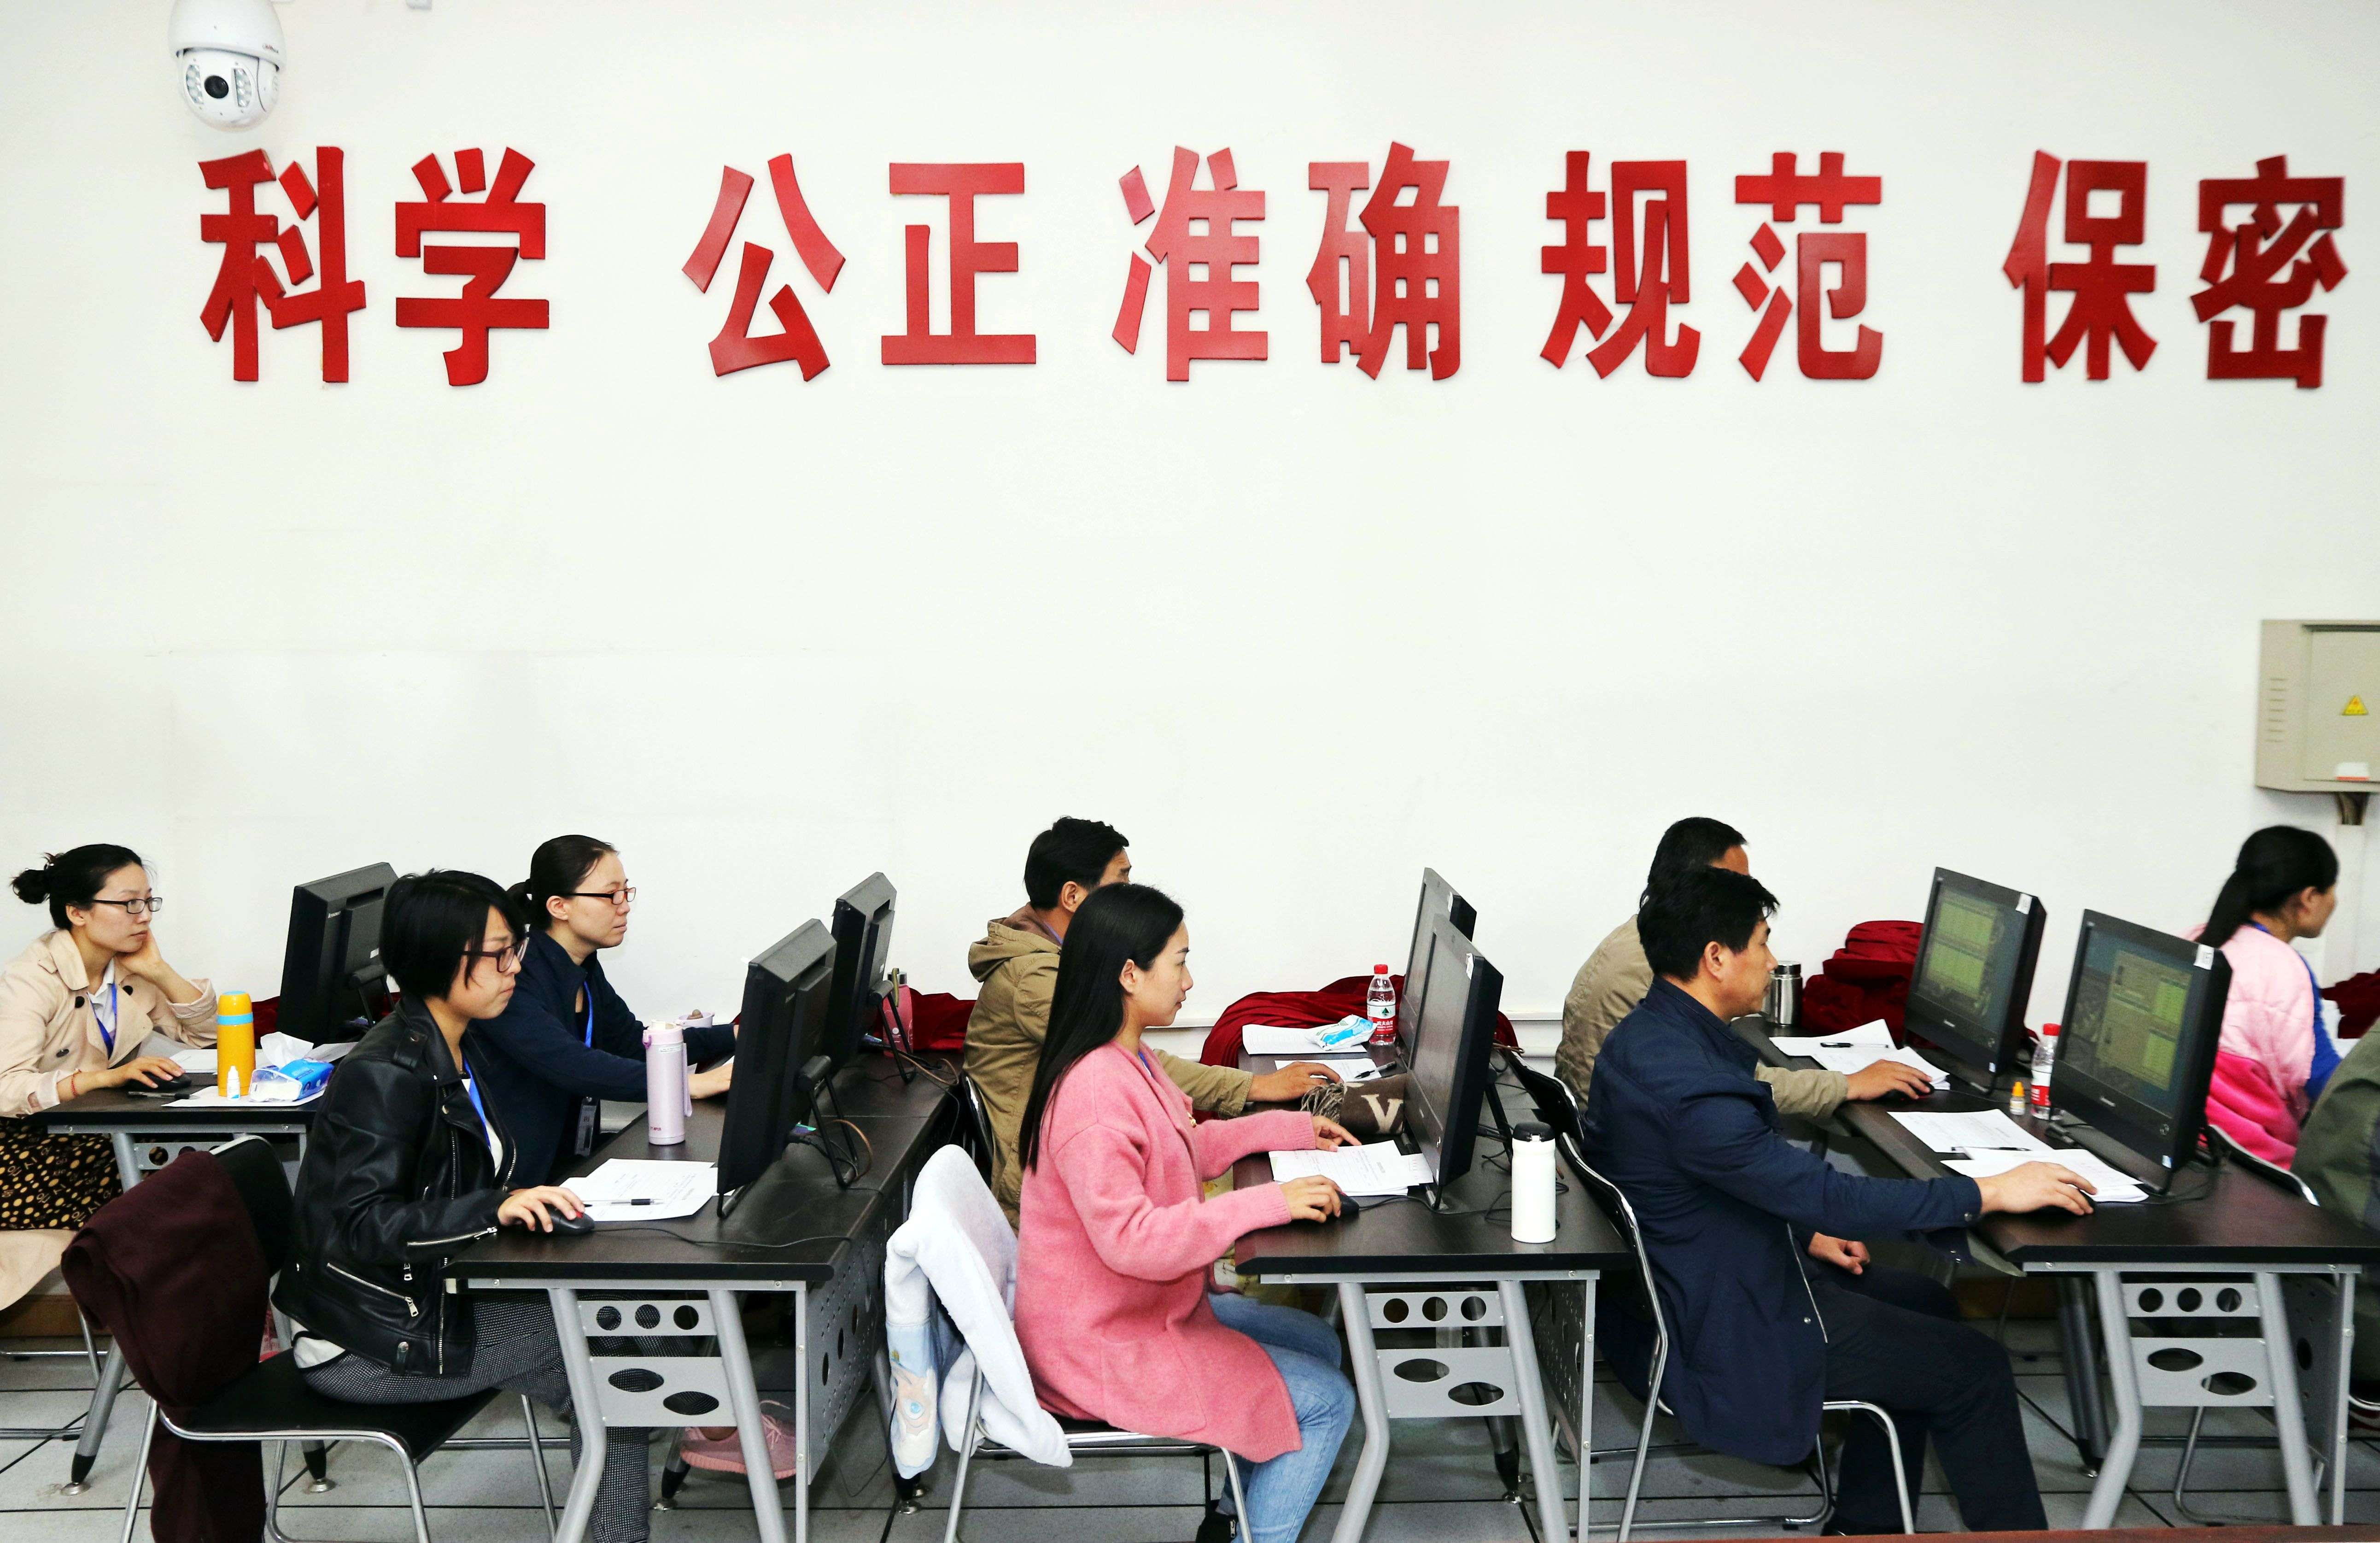 China’s education officers monitor students taking their university entrance exam in Zhengzhou, Henan province, earlier this month. Photo: AFP